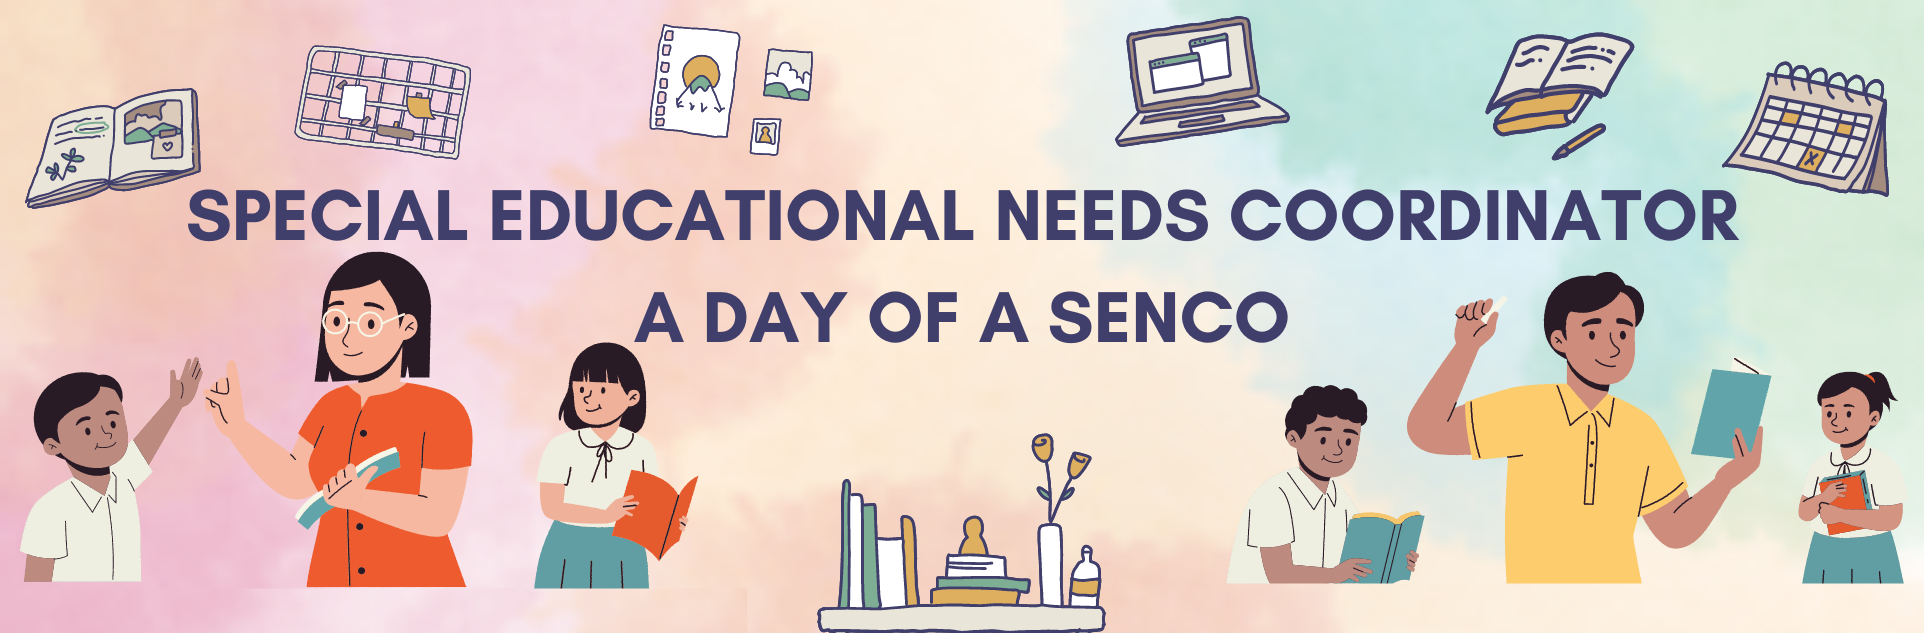 Special Educational Needs Coordinator - A Day of a SENCO